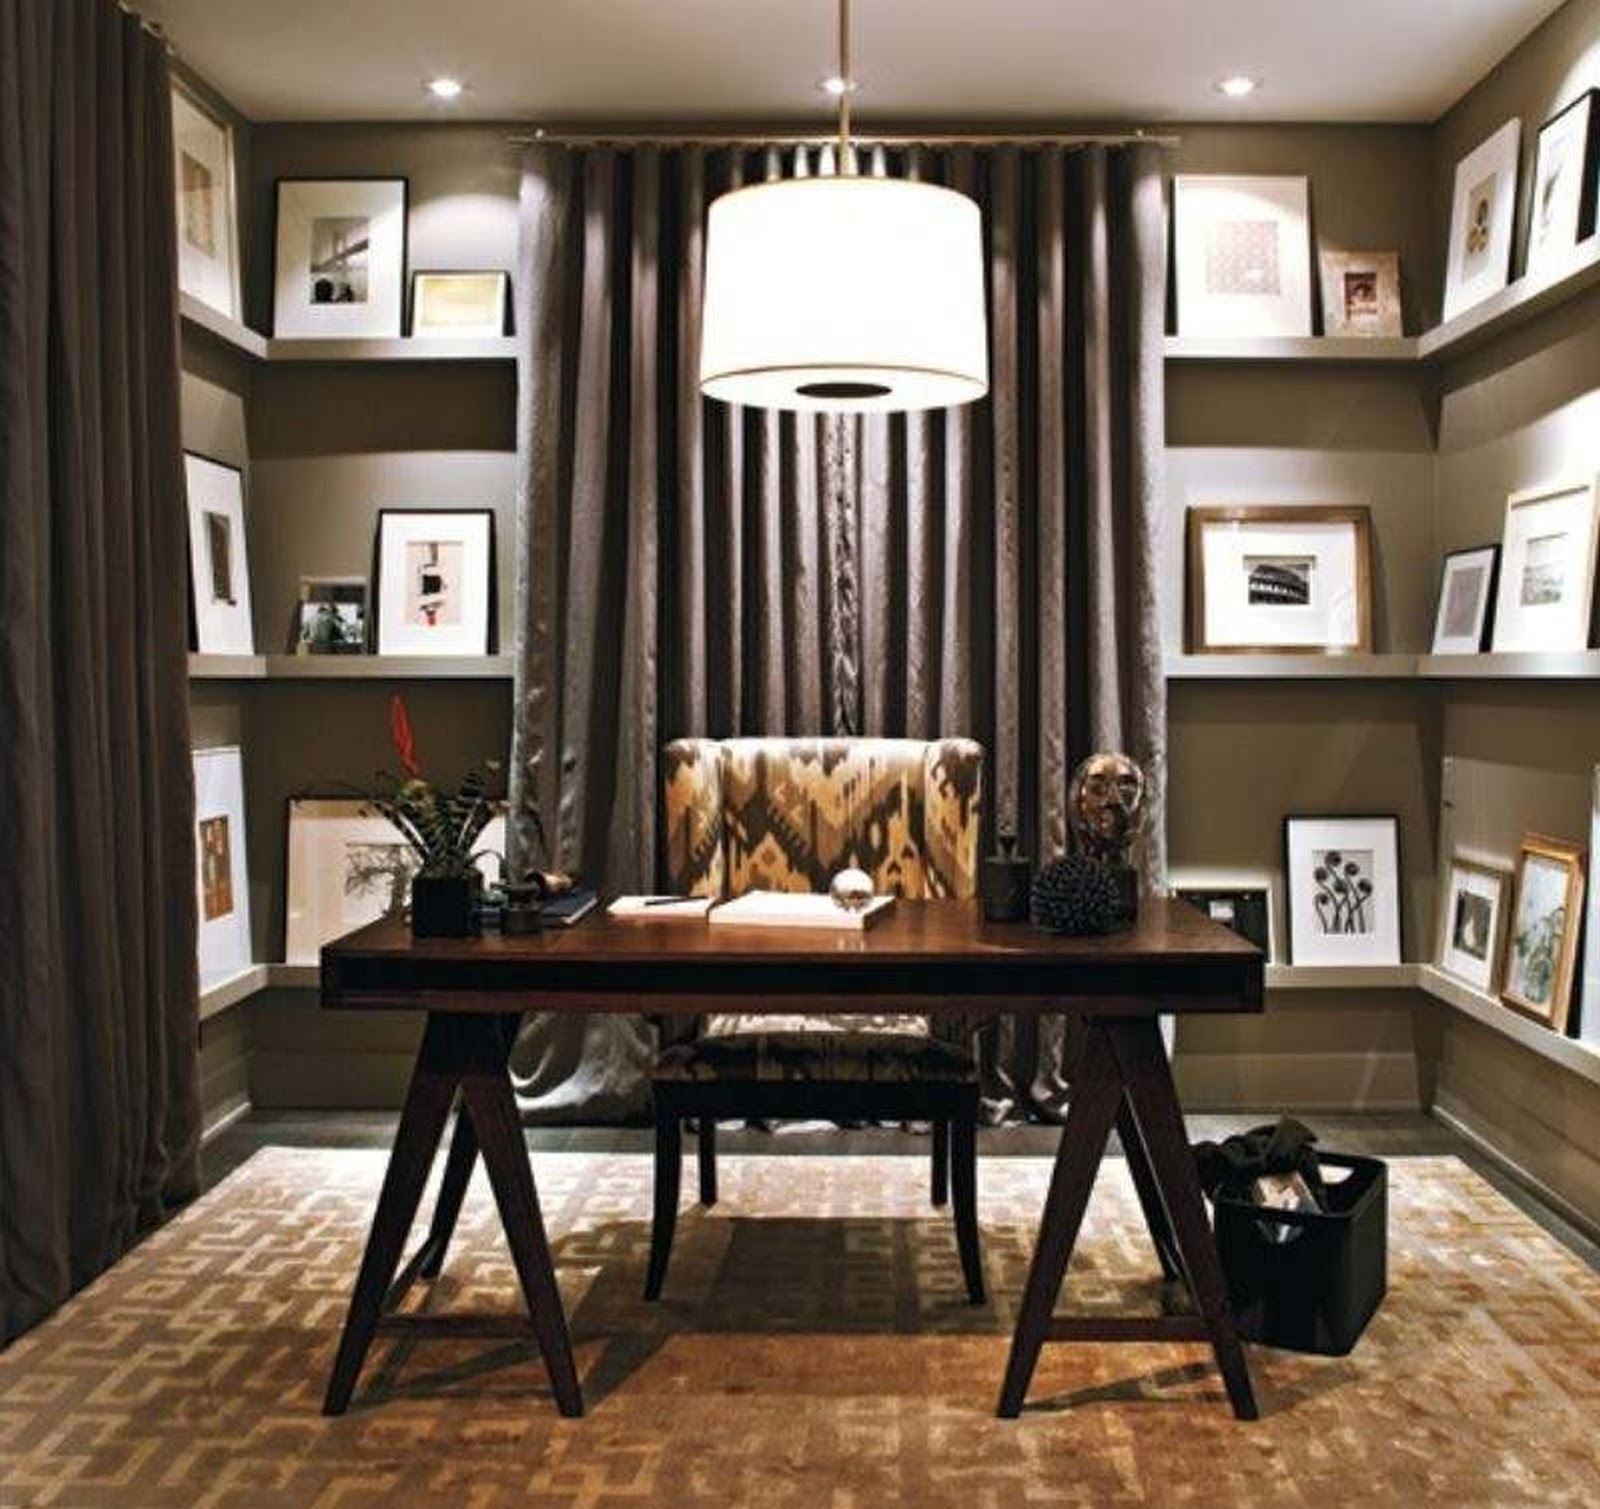 5 Tips How to Decorating an Artistic Home Office - Interior Design Ideas